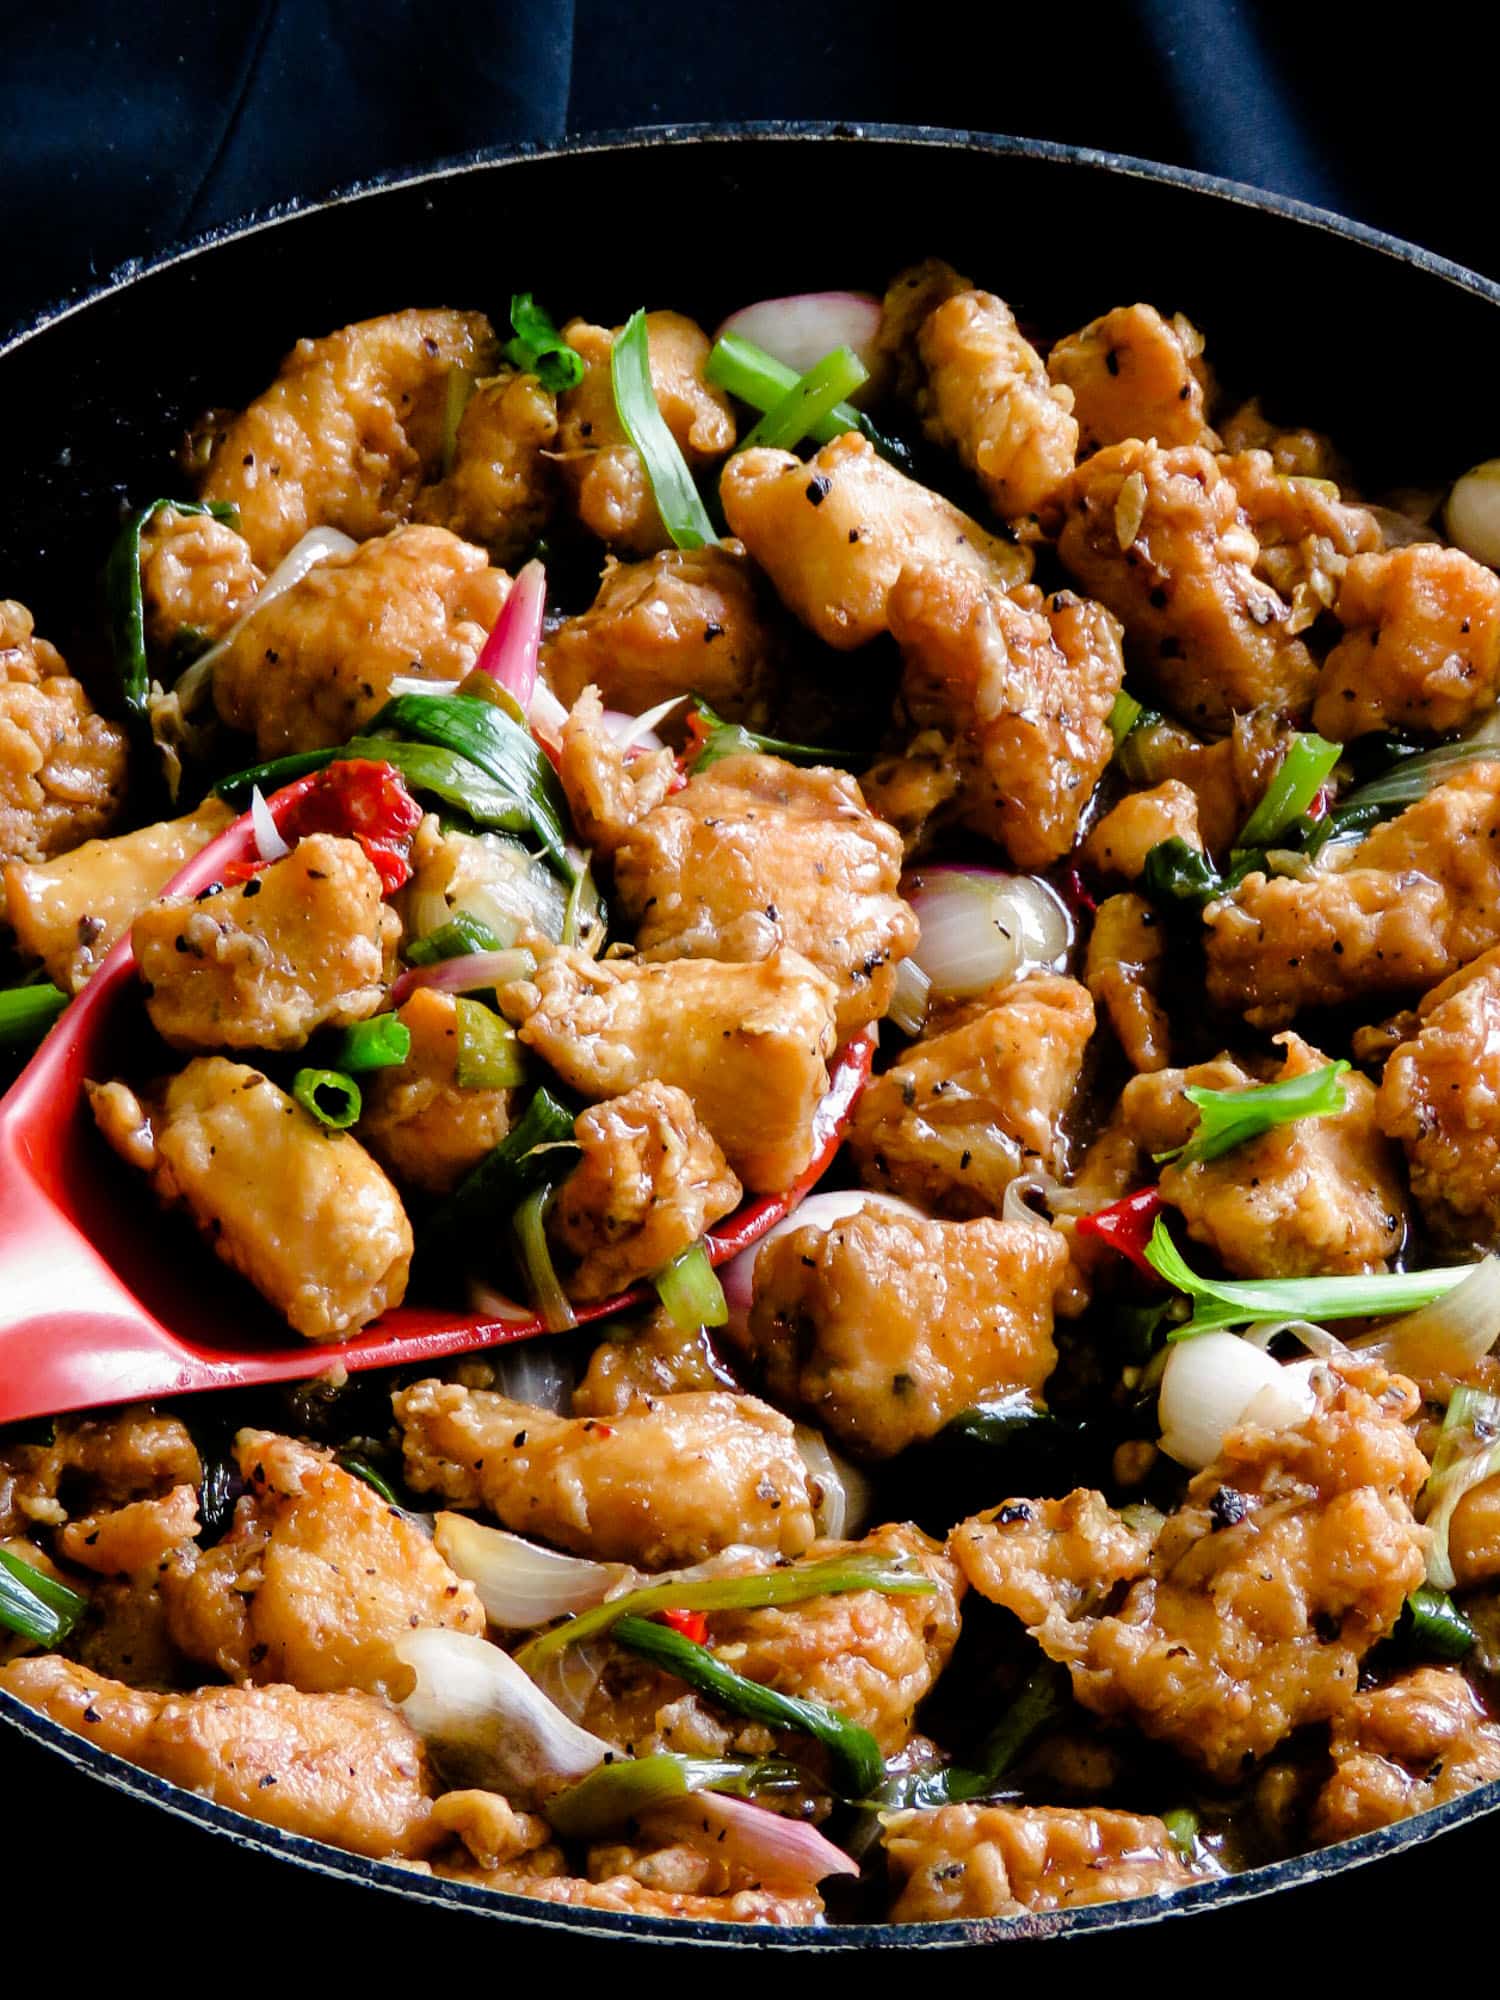 Chinese chicken Manchurian-do something different for your weekend dinner, make a large pan of this delicious (restaurant-style) indo-Chinese dish.  There's no need to make multiple dishes, just a bowl of rice or noodles is all you need for an easy meal for the family. #chinese #fastfood #Indian #meal #skillet #appetizer #chinese